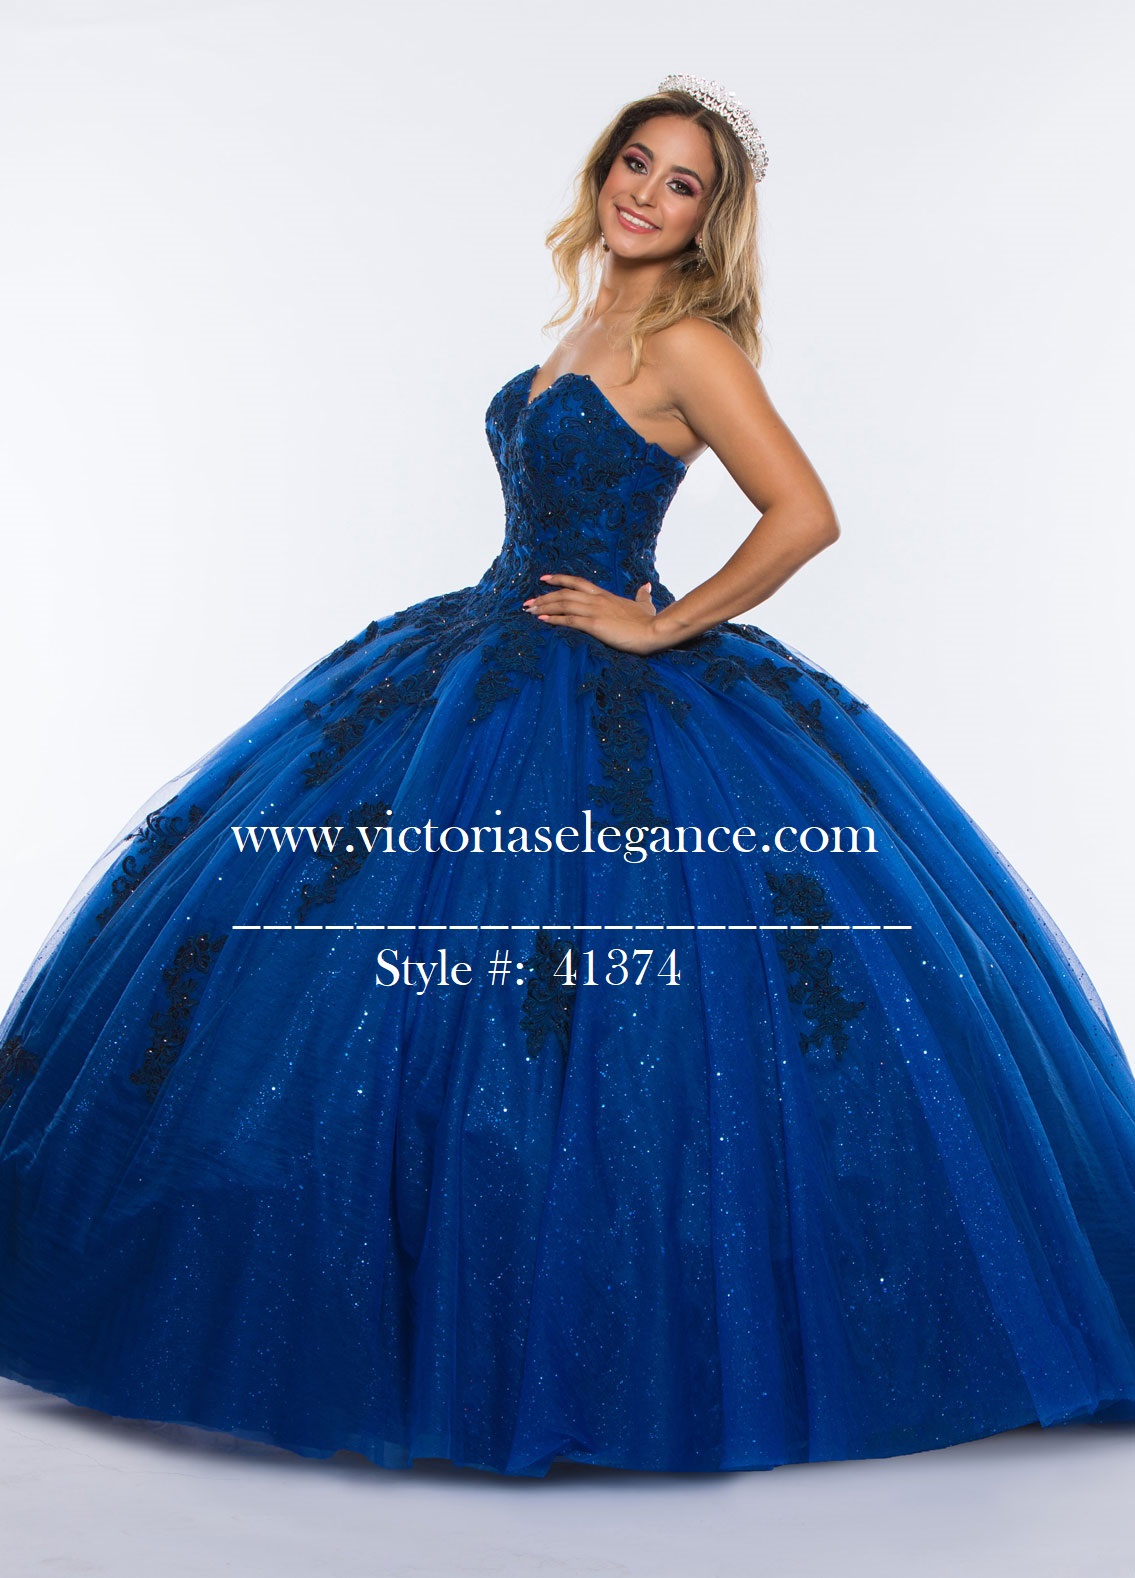 Quince Royale Glitter Tulle Ball Gown Sweetheart Bodice